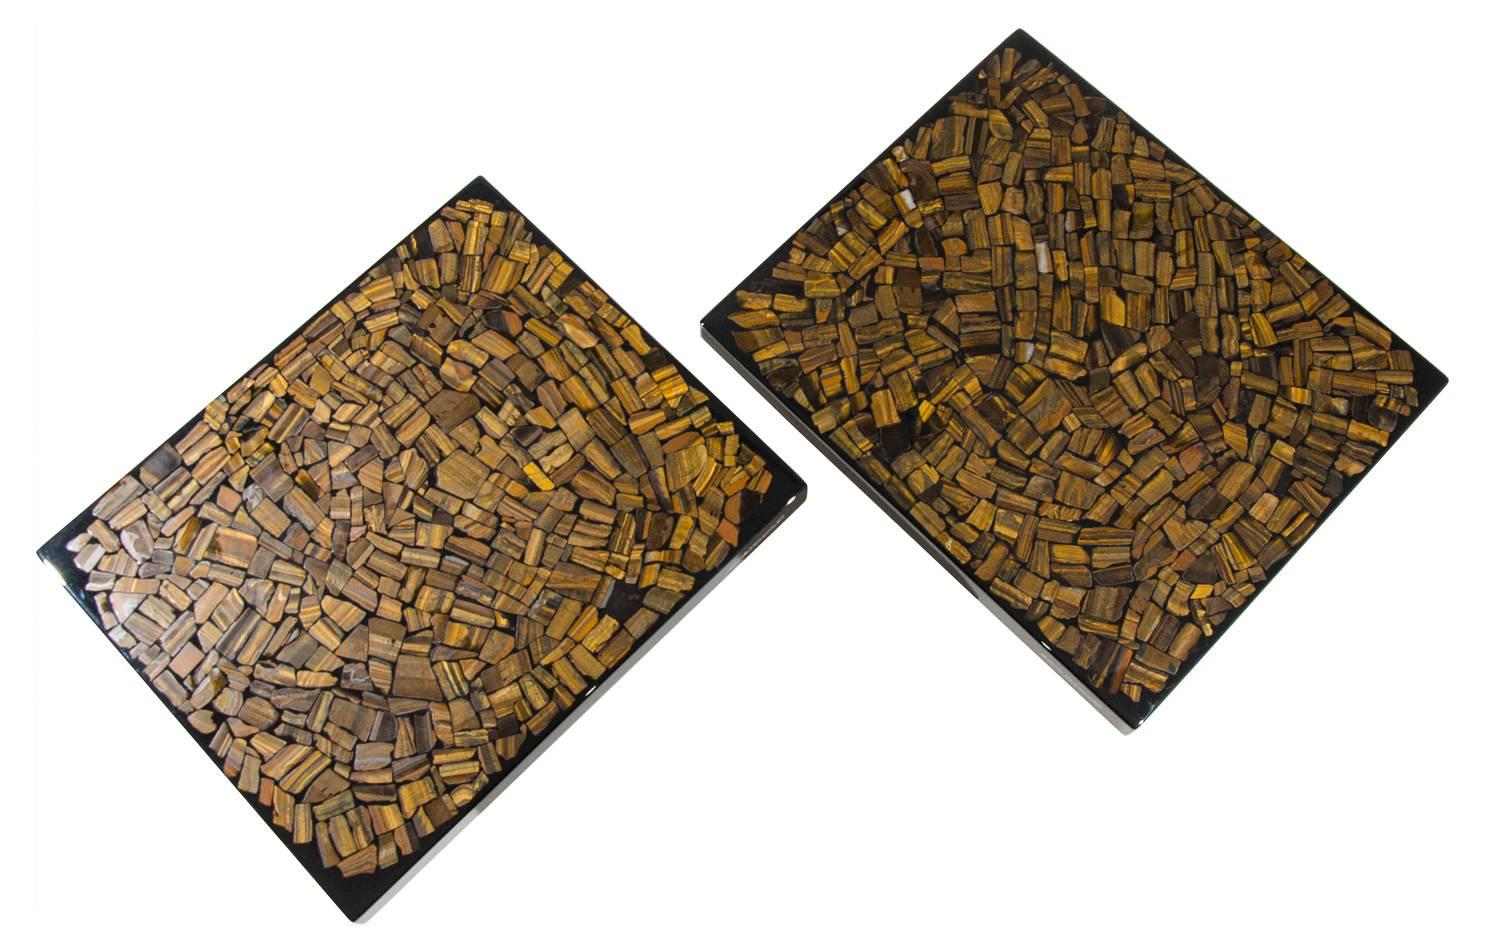 Pair of side table by E. Allemeersch black resin inlay tiger eyes, mosaic in tiger eyes, signed by the artist, circa 1980.